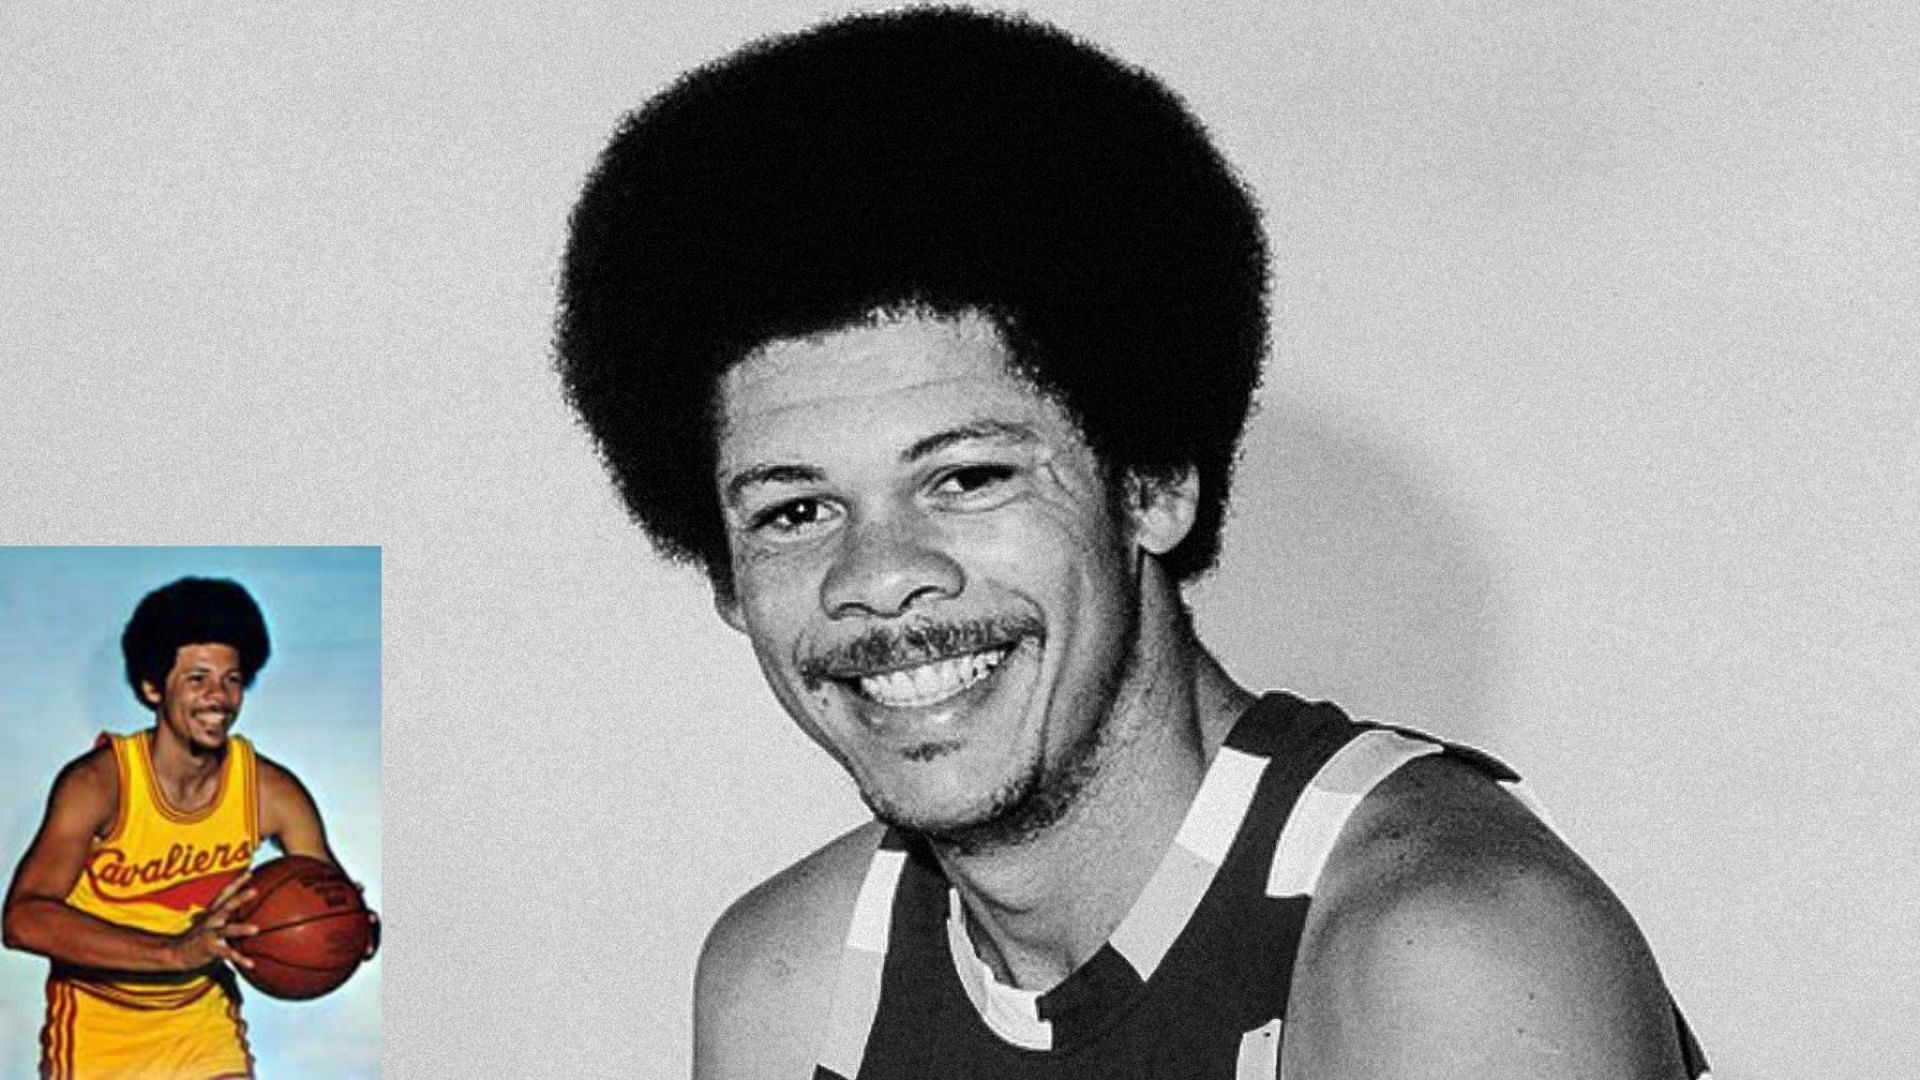 Bobby &quot;Bingo&quot; Smith, a Cleveland Cavaliers legend, has passed away